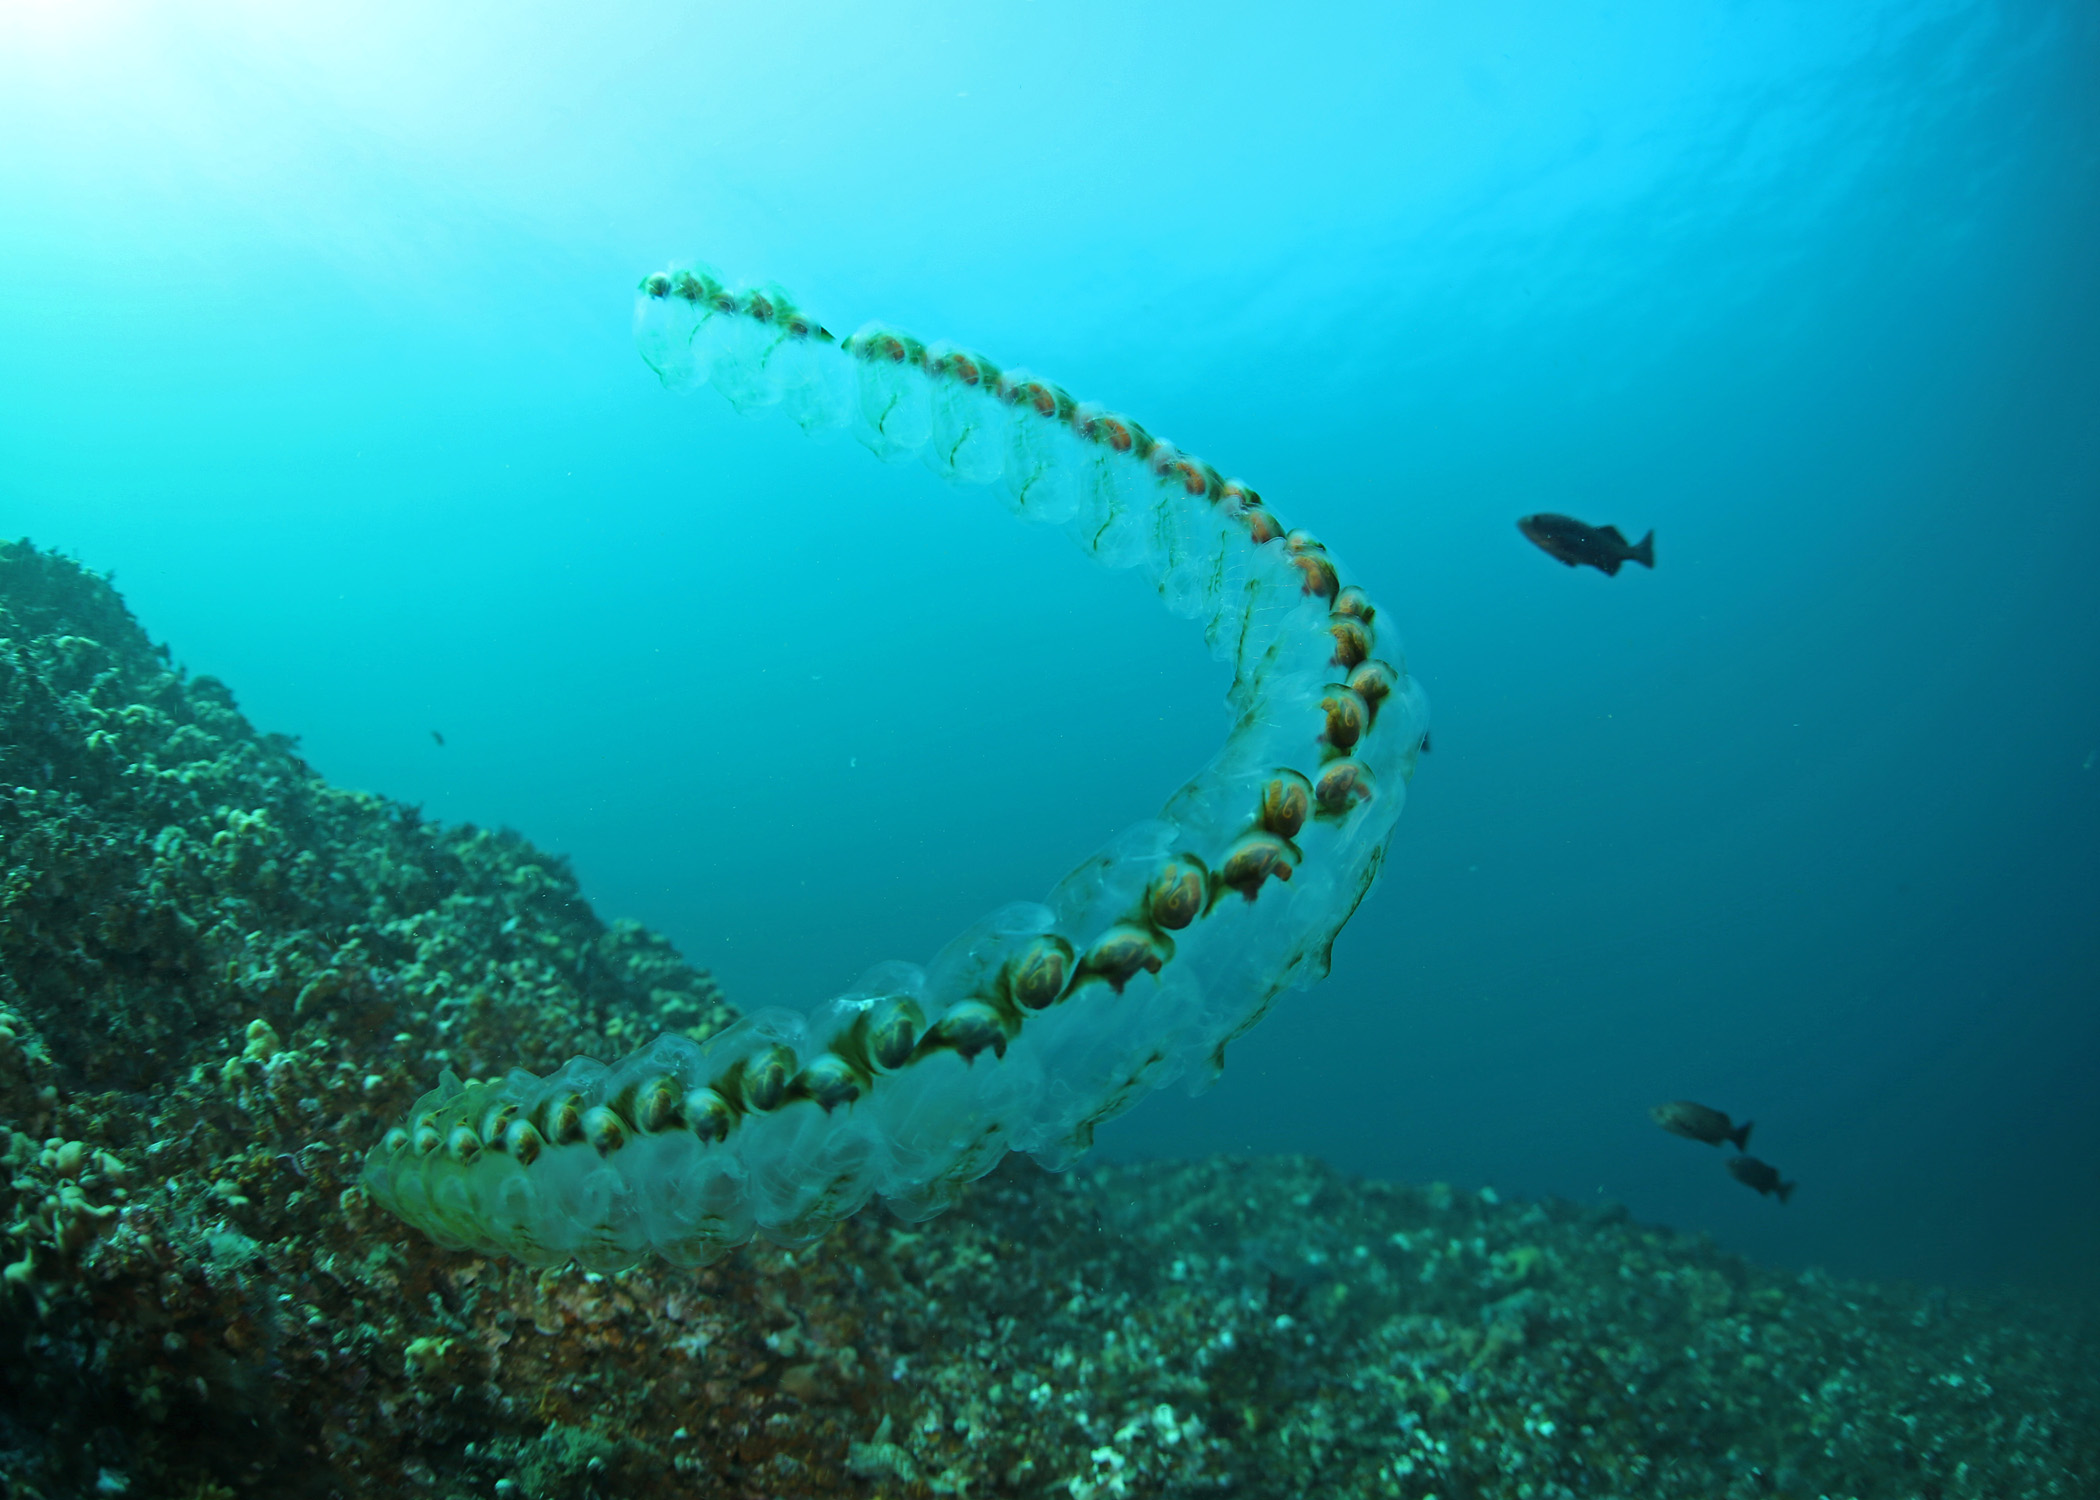 The image displays a group of salps near a coral reef. This appears as a long, globular chain, with interior sections shaped like snails.